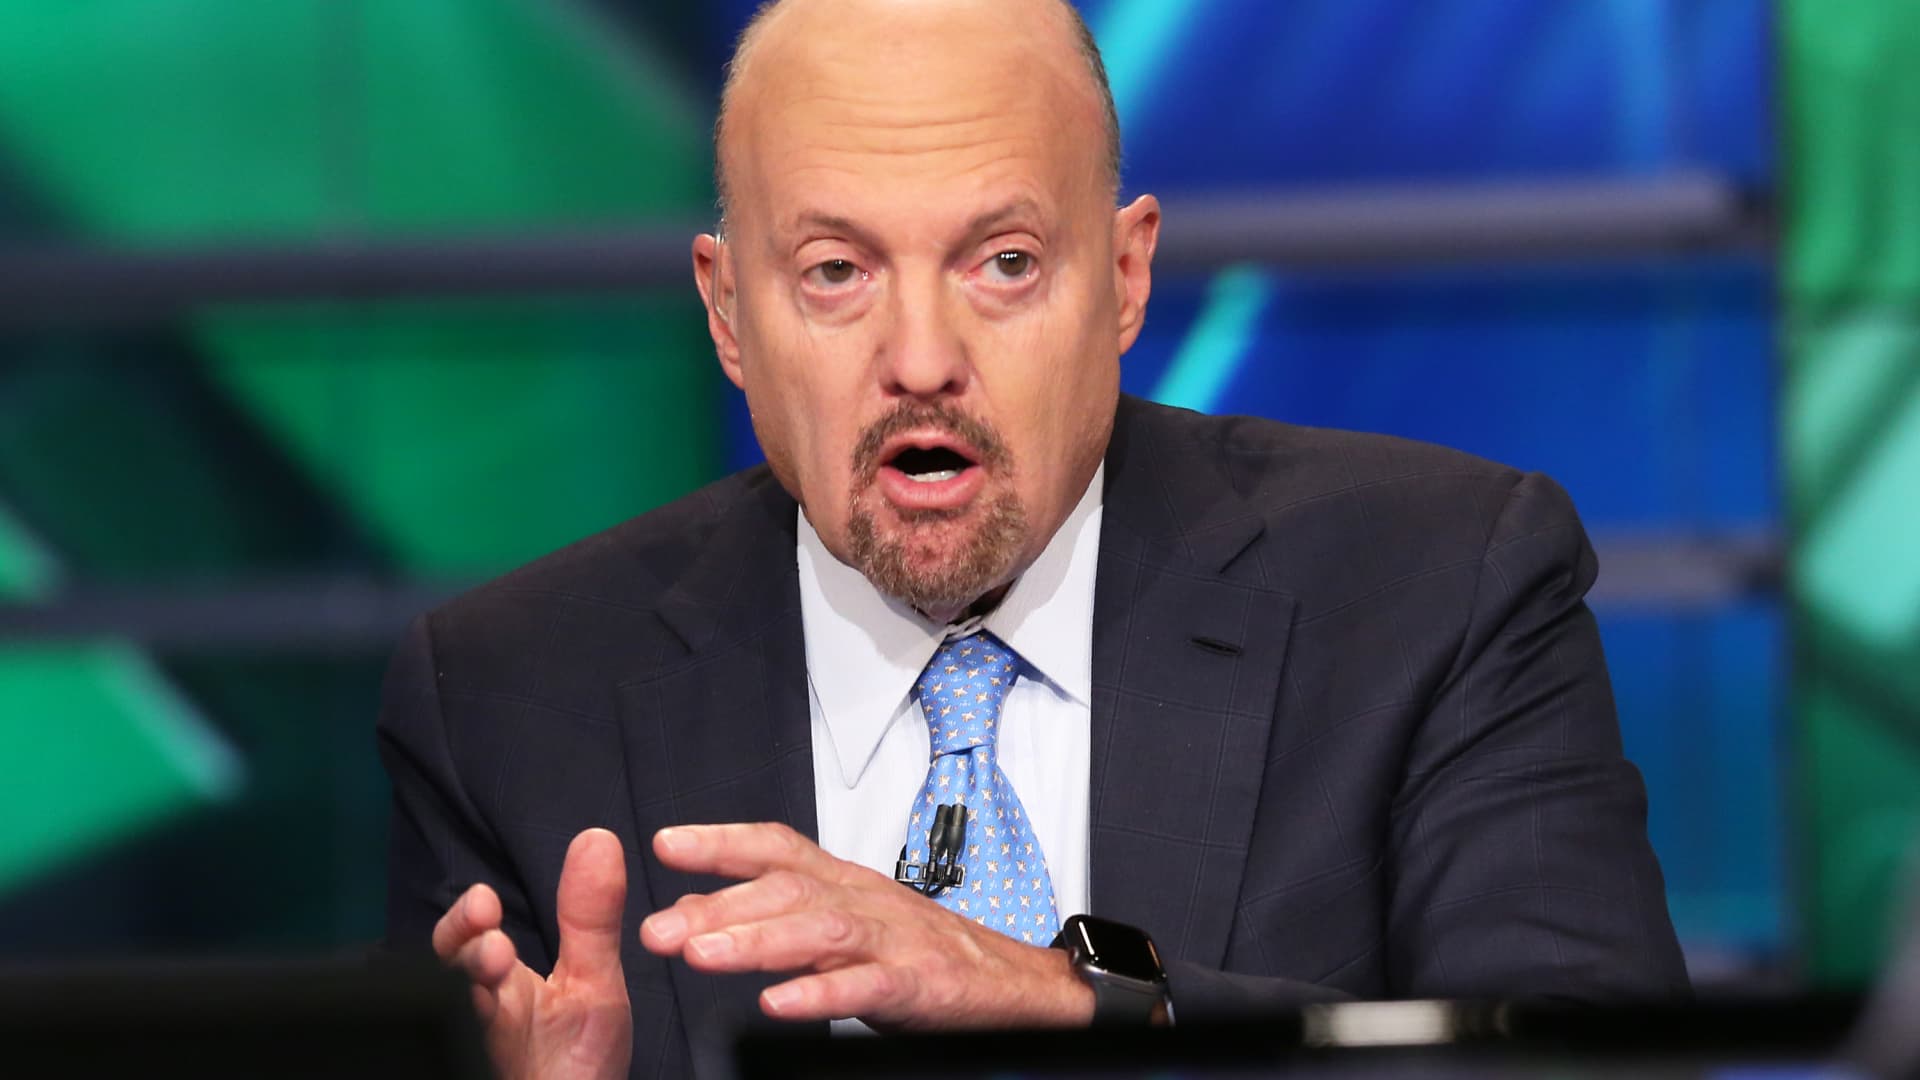 Jim Cramer’s Investing Club meeting Monday: Industrials, buying tech, Eli Lilly